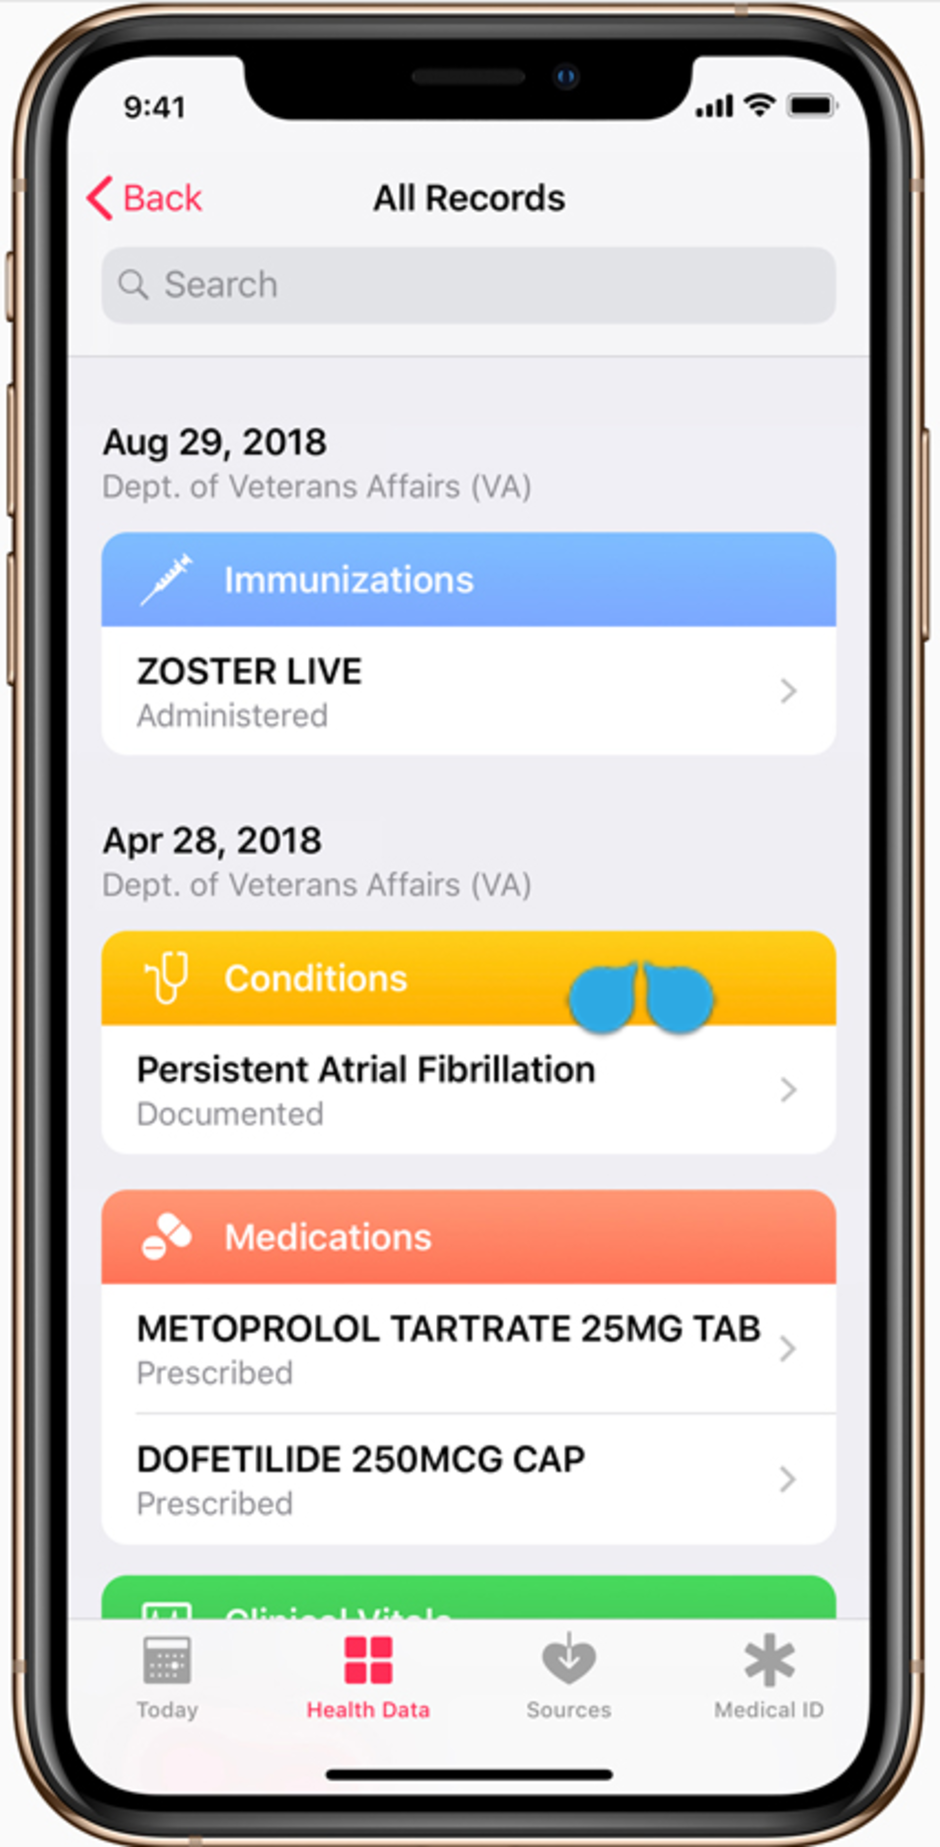 Vets will soon be able to see their aggregated medical records on an Apple iPhone - Apple is breaking down the barrier between patients and doctors starting with this news